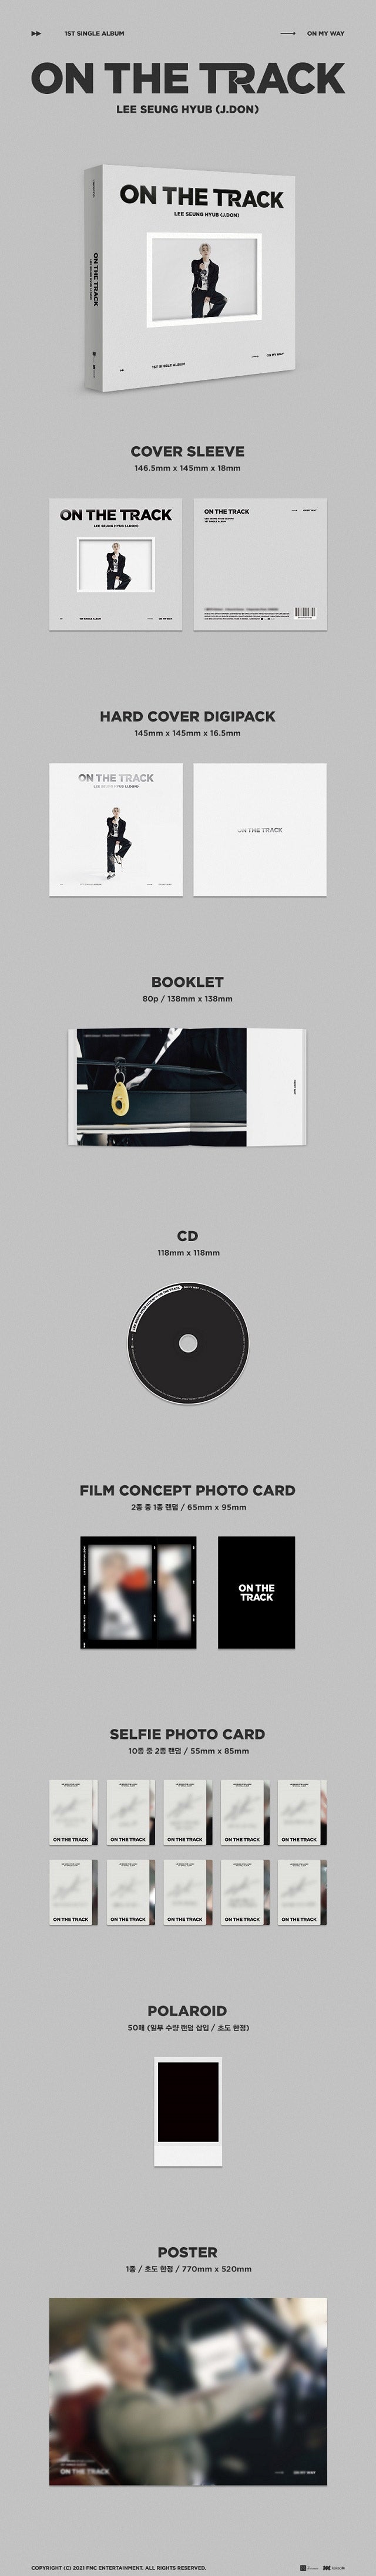 1 CD
1 Booklet (80 pages)
1 Concept Photo Card
2 Selfie Photo Cards